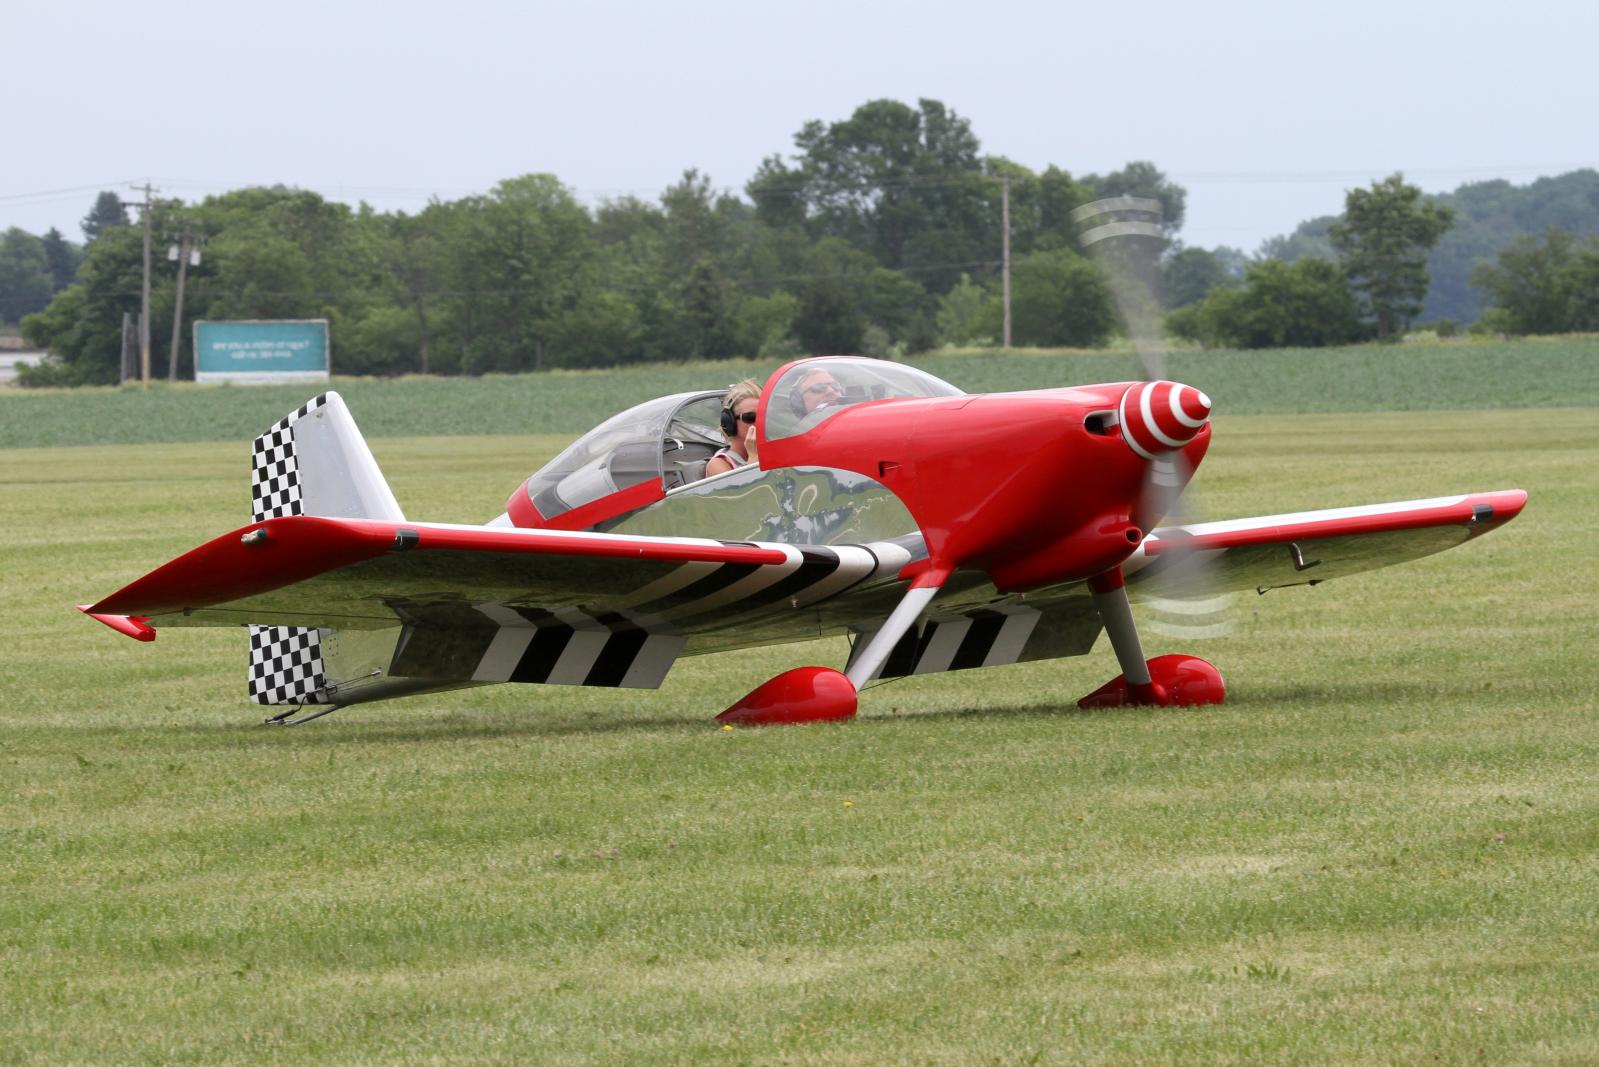 a small aircraft on the ground in a field